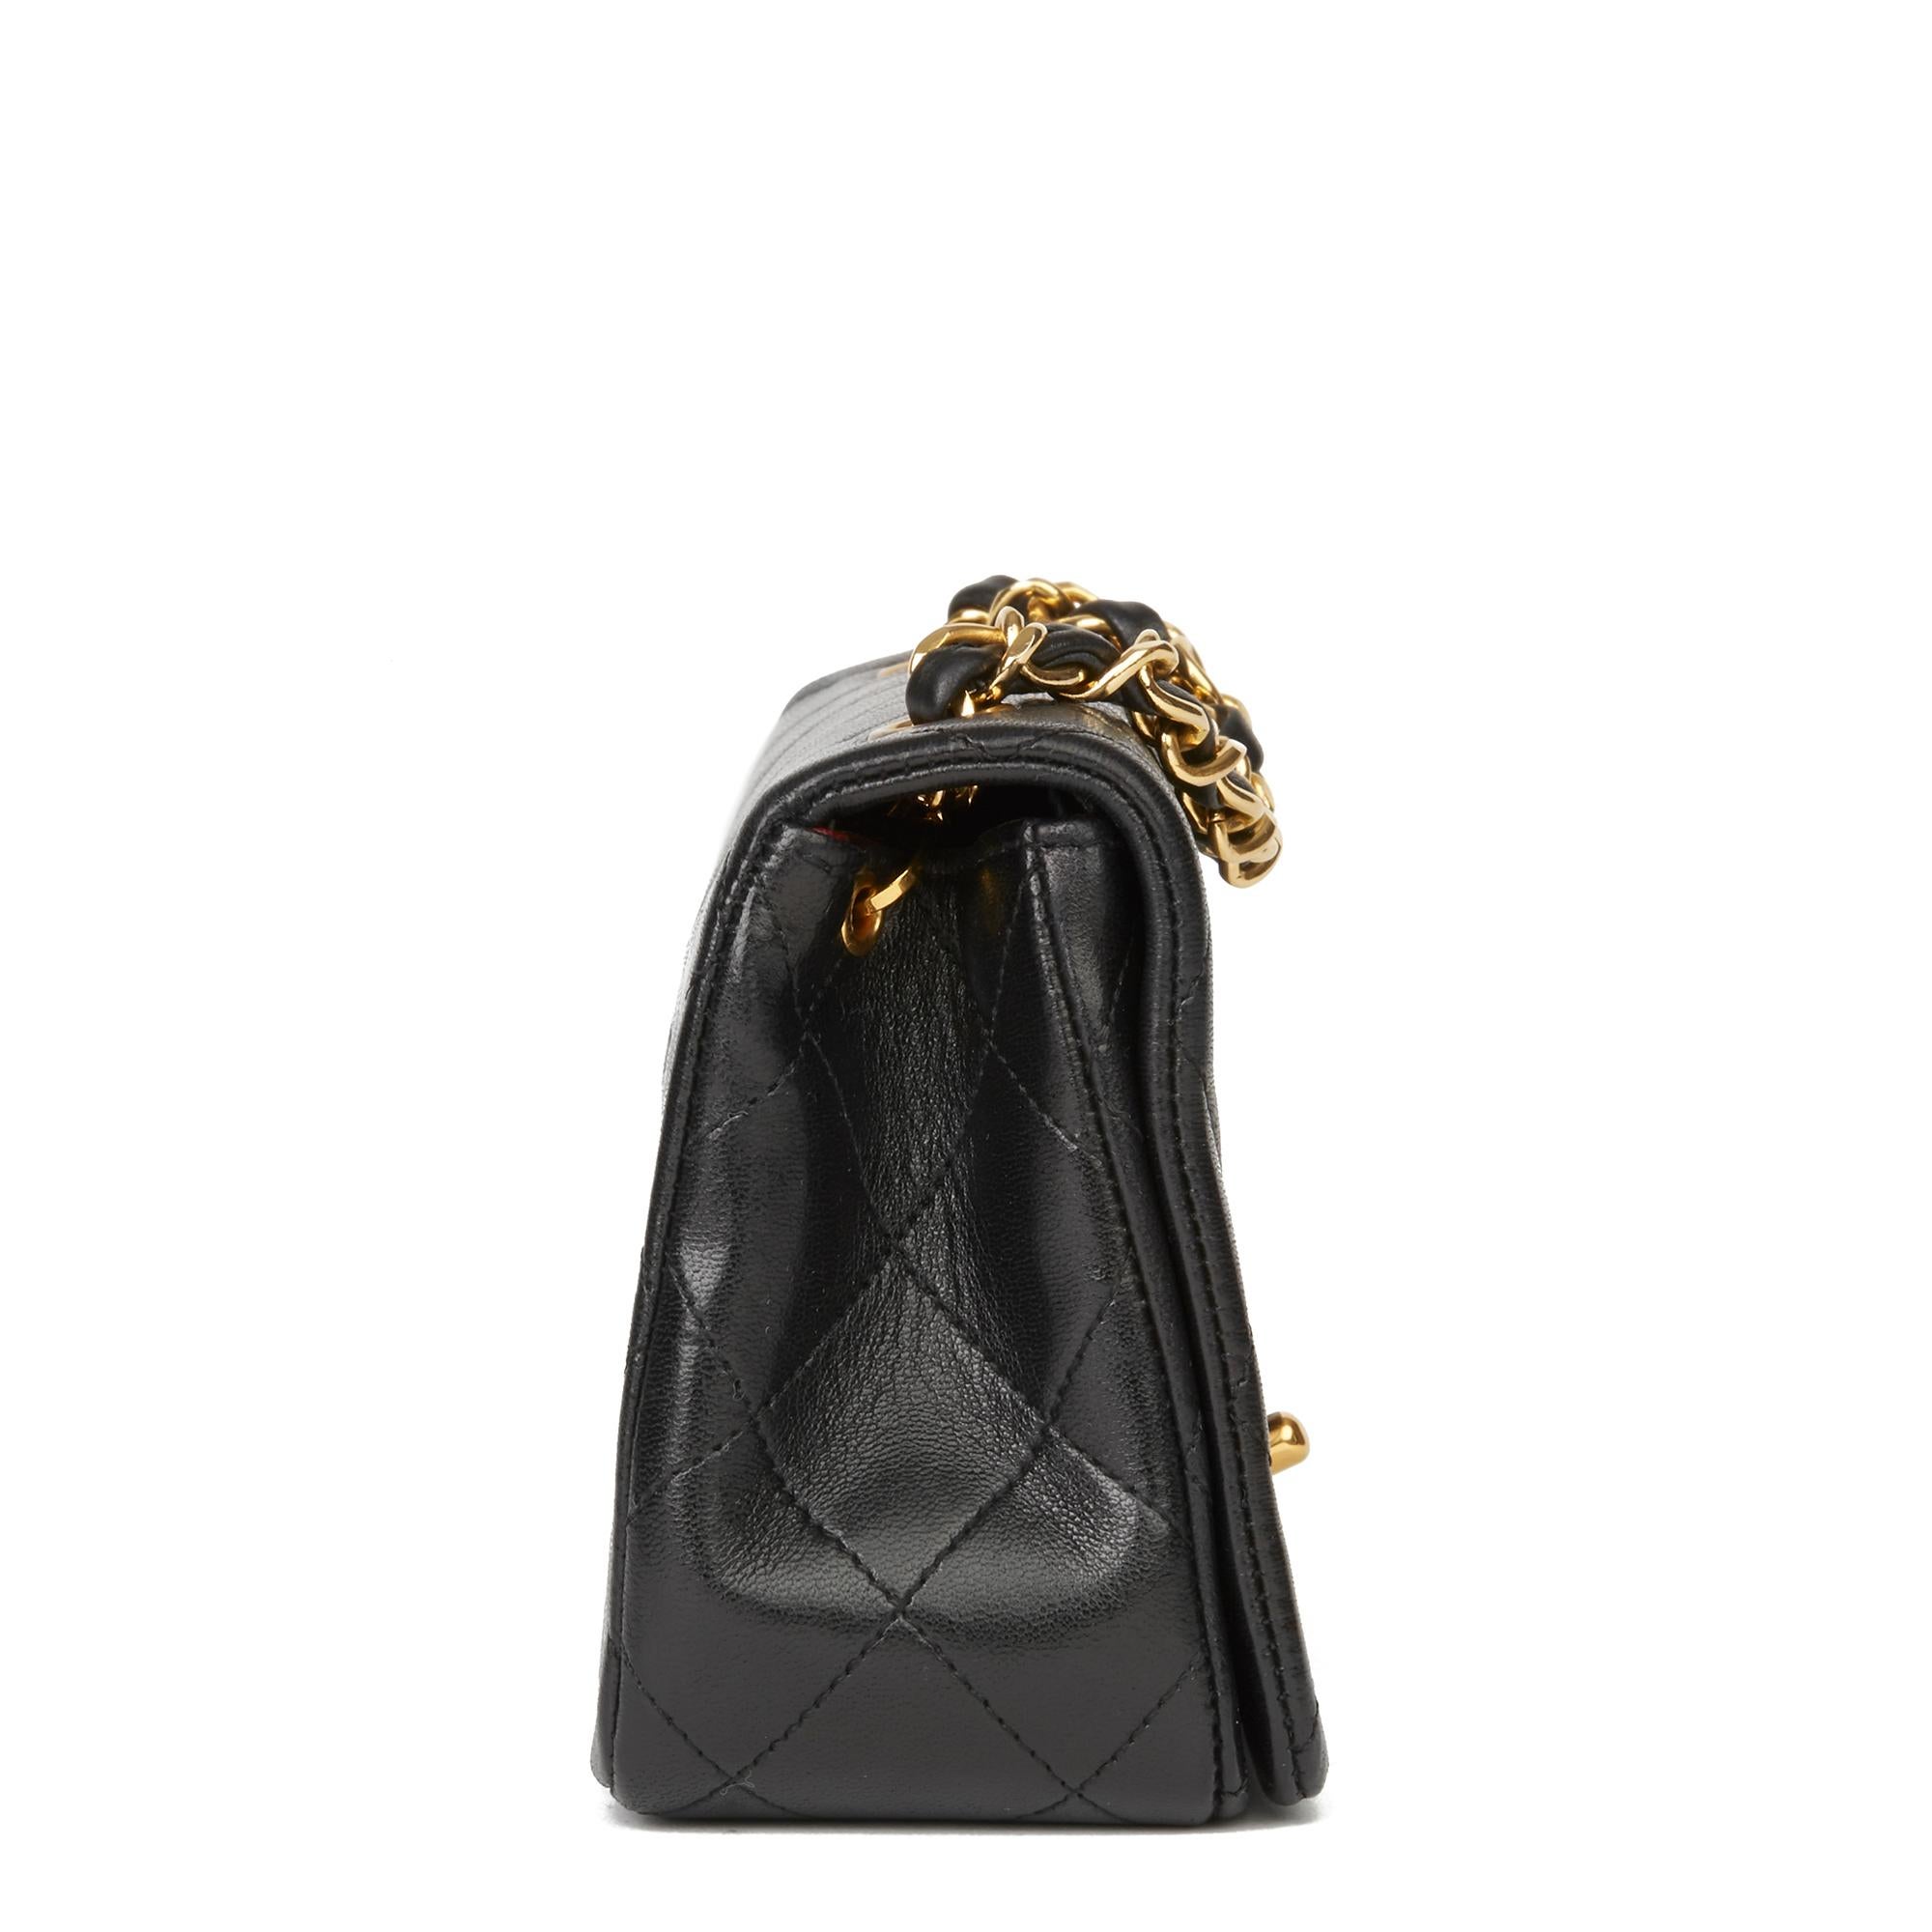 CHANEL
Black Quilted Lambskin Vintage Mini Flap Bag

Reference: HB2812
Serial Number: 1281900
Age (Circa): 1991
Accompanied By: Chanel Dust Bag, Box, Authenticity Card
Authenticity Details: Serial Sticker, Authenticity Card (Made in France)
Gender: